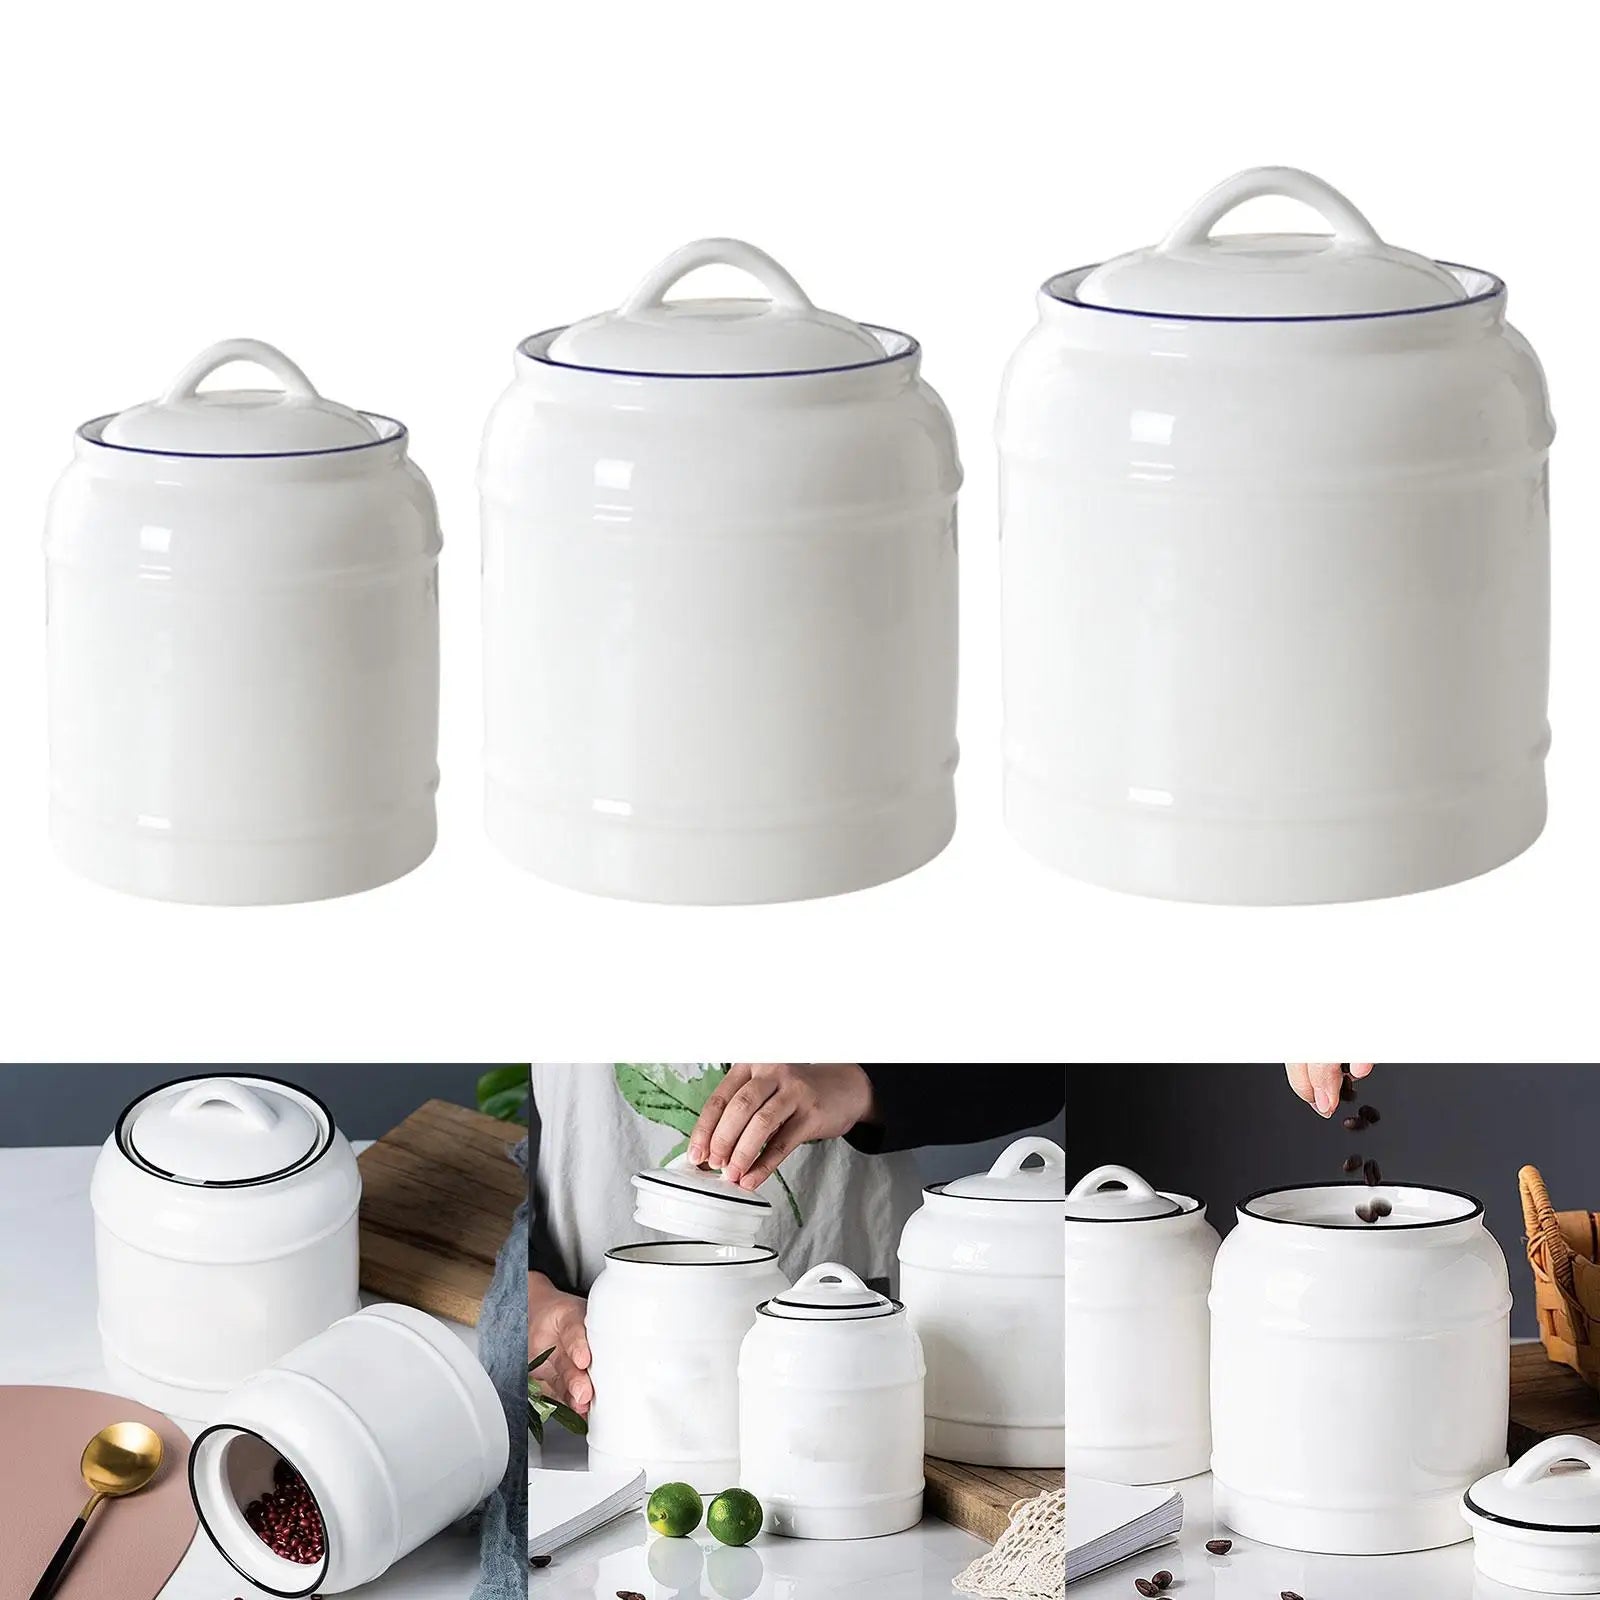 Ceramic Jar with Airtight Lid Countertop Kitchen Kitchen Canisters Ceramic Food Storage Jar